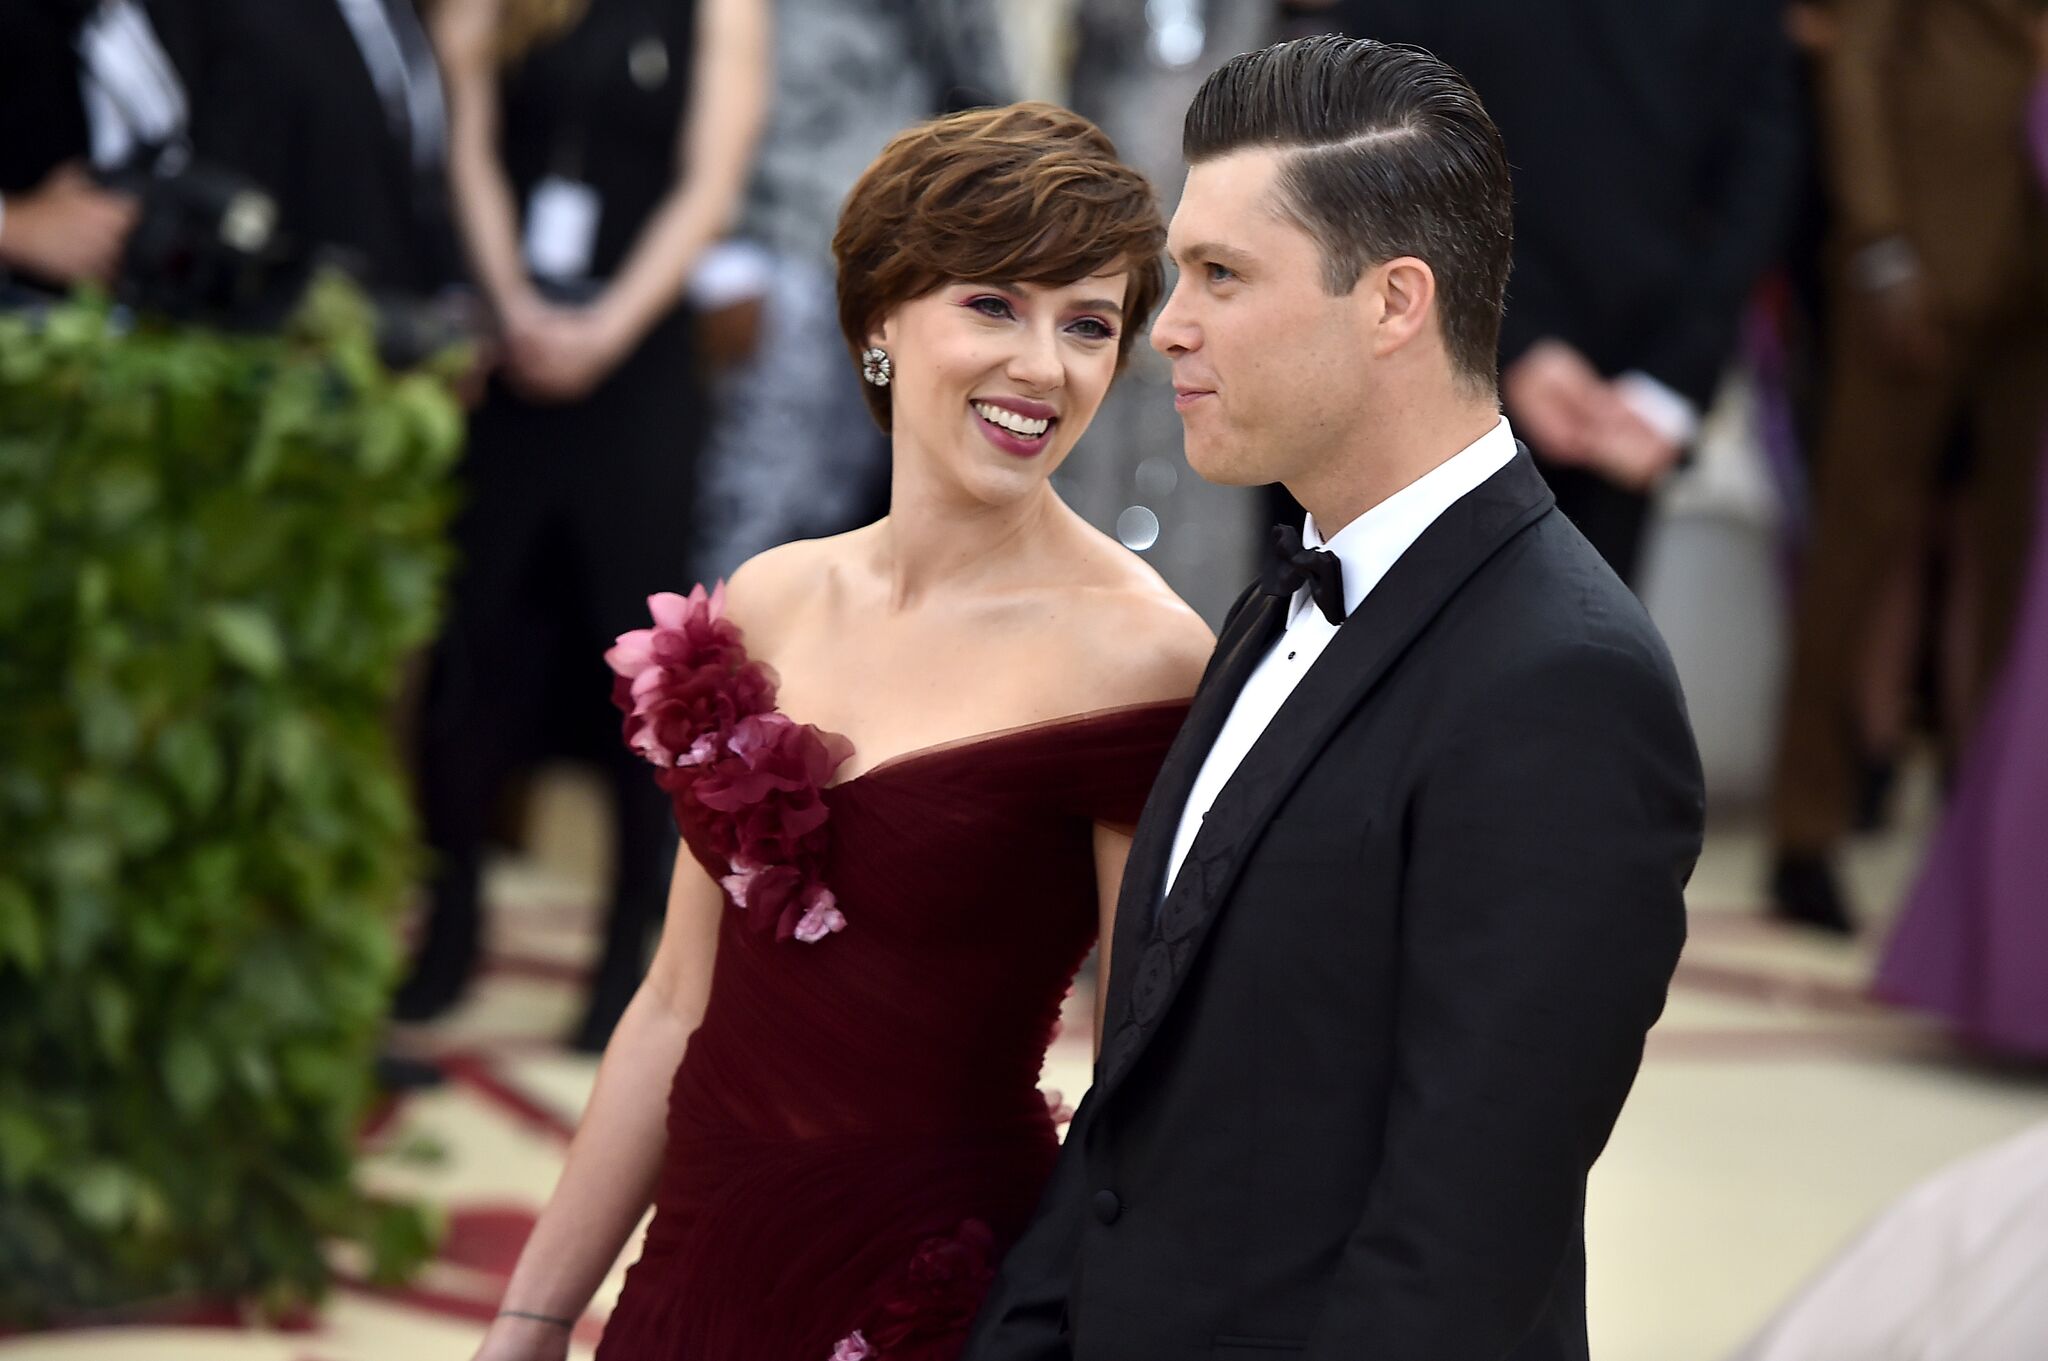 Scarlett Johansson and Colin Jost together at the MET Gala 2018 | Getty Images